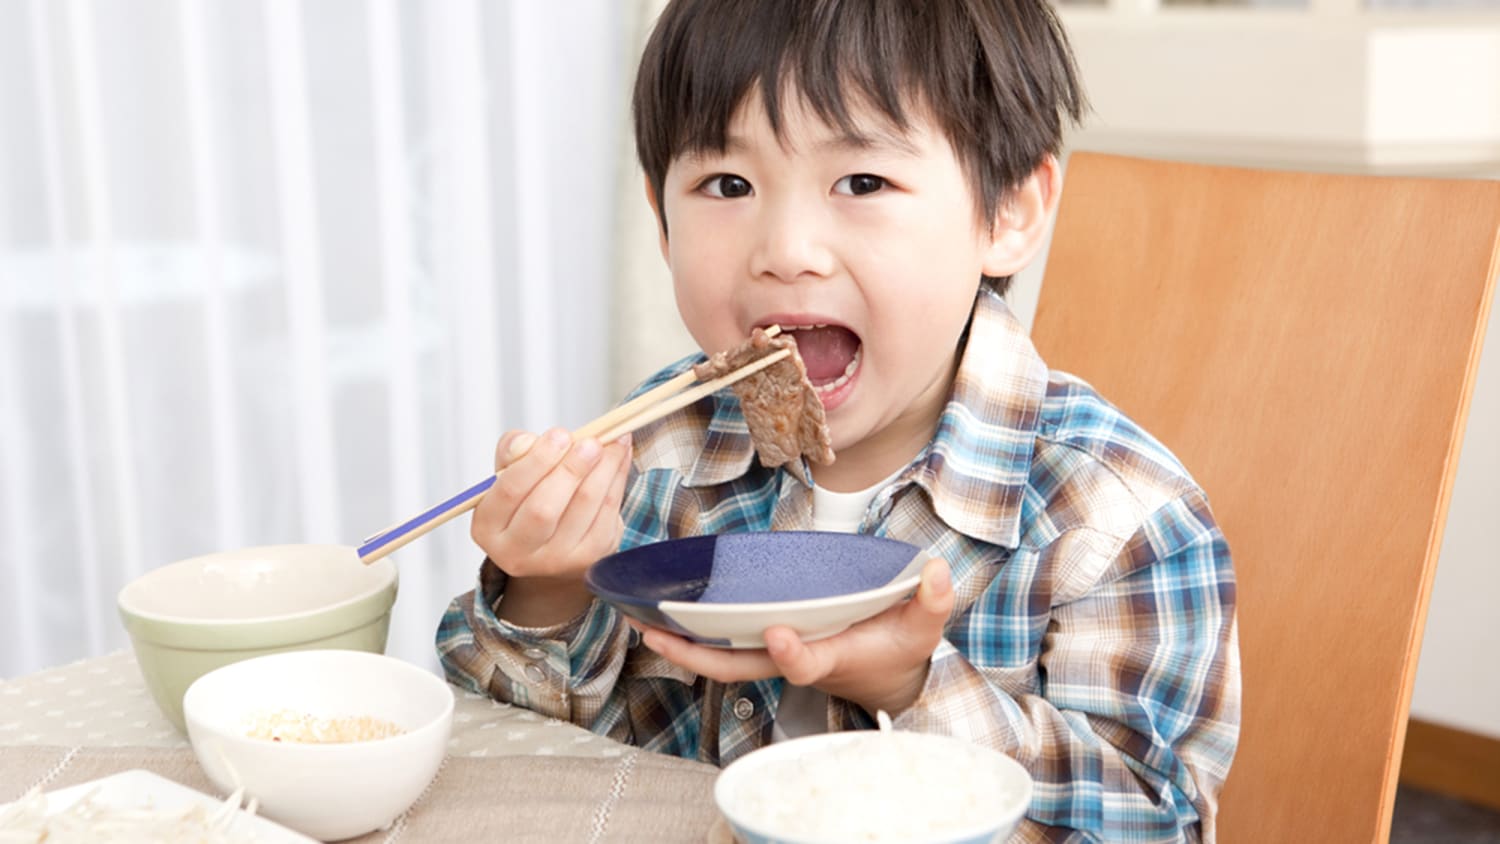 Why Japans Children Have The Longest Healthy Life Expectancy in healthy foods to eat in japan pertaining to Inspire